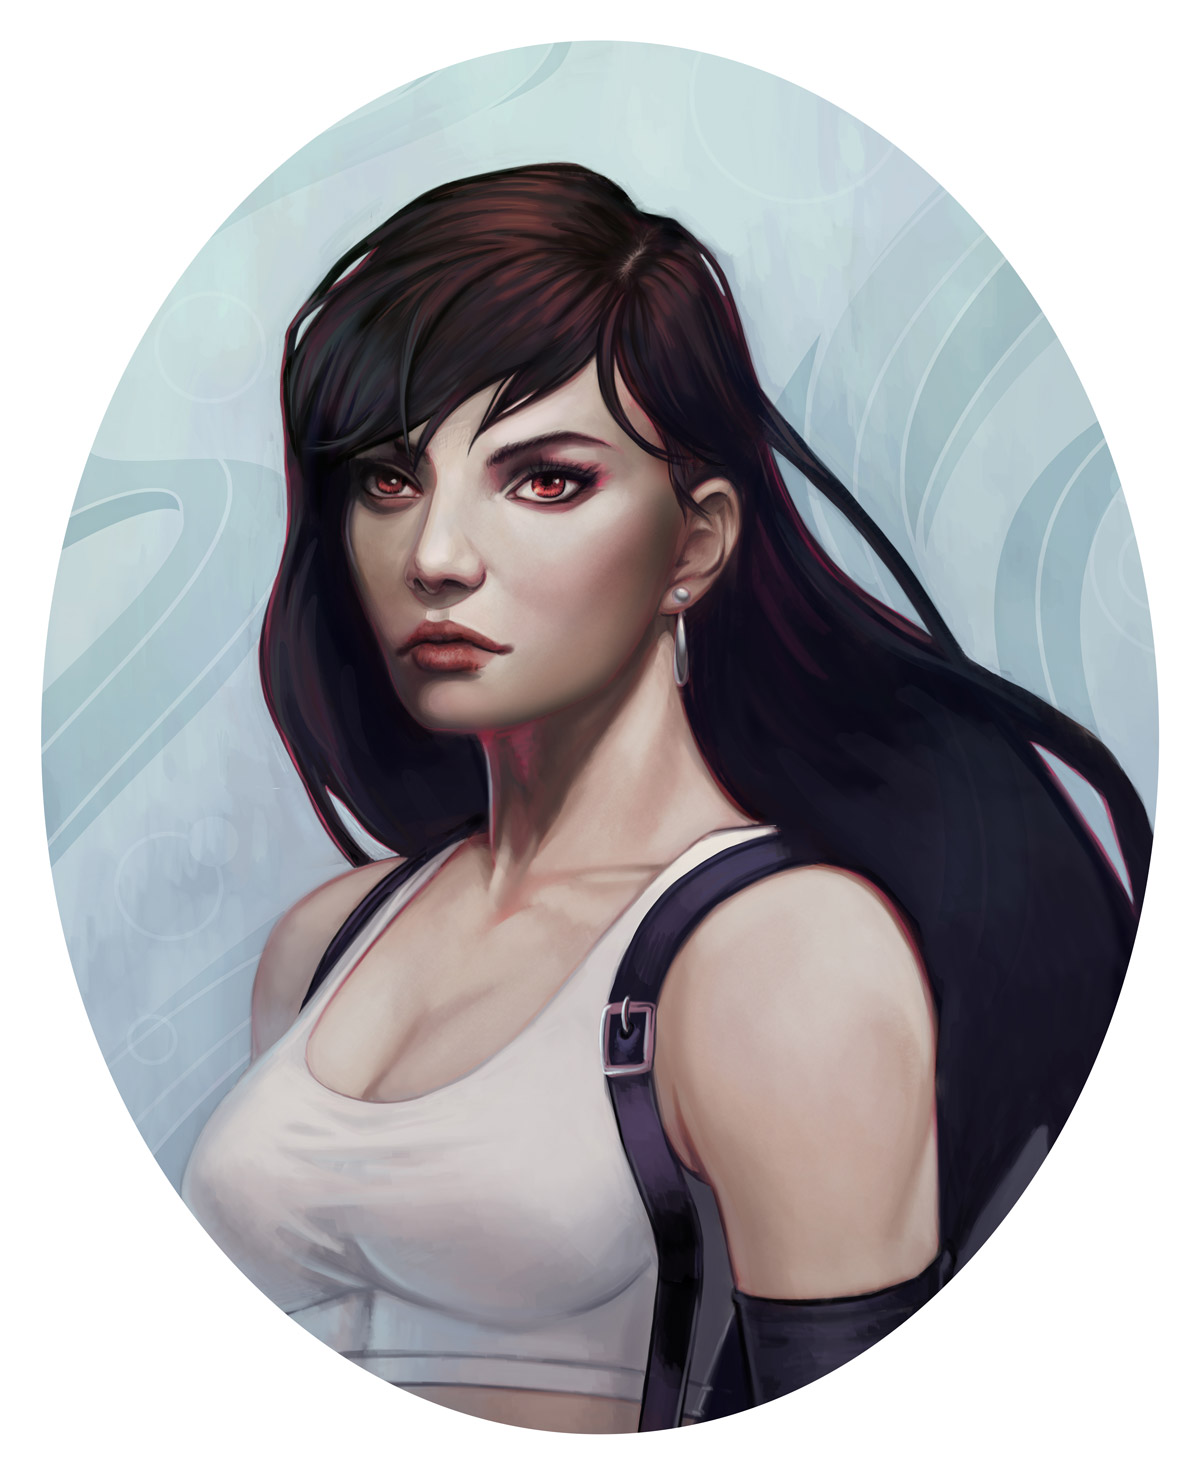 Digital portrait of Tifa Lockheart from the video game Final Fantasy VII